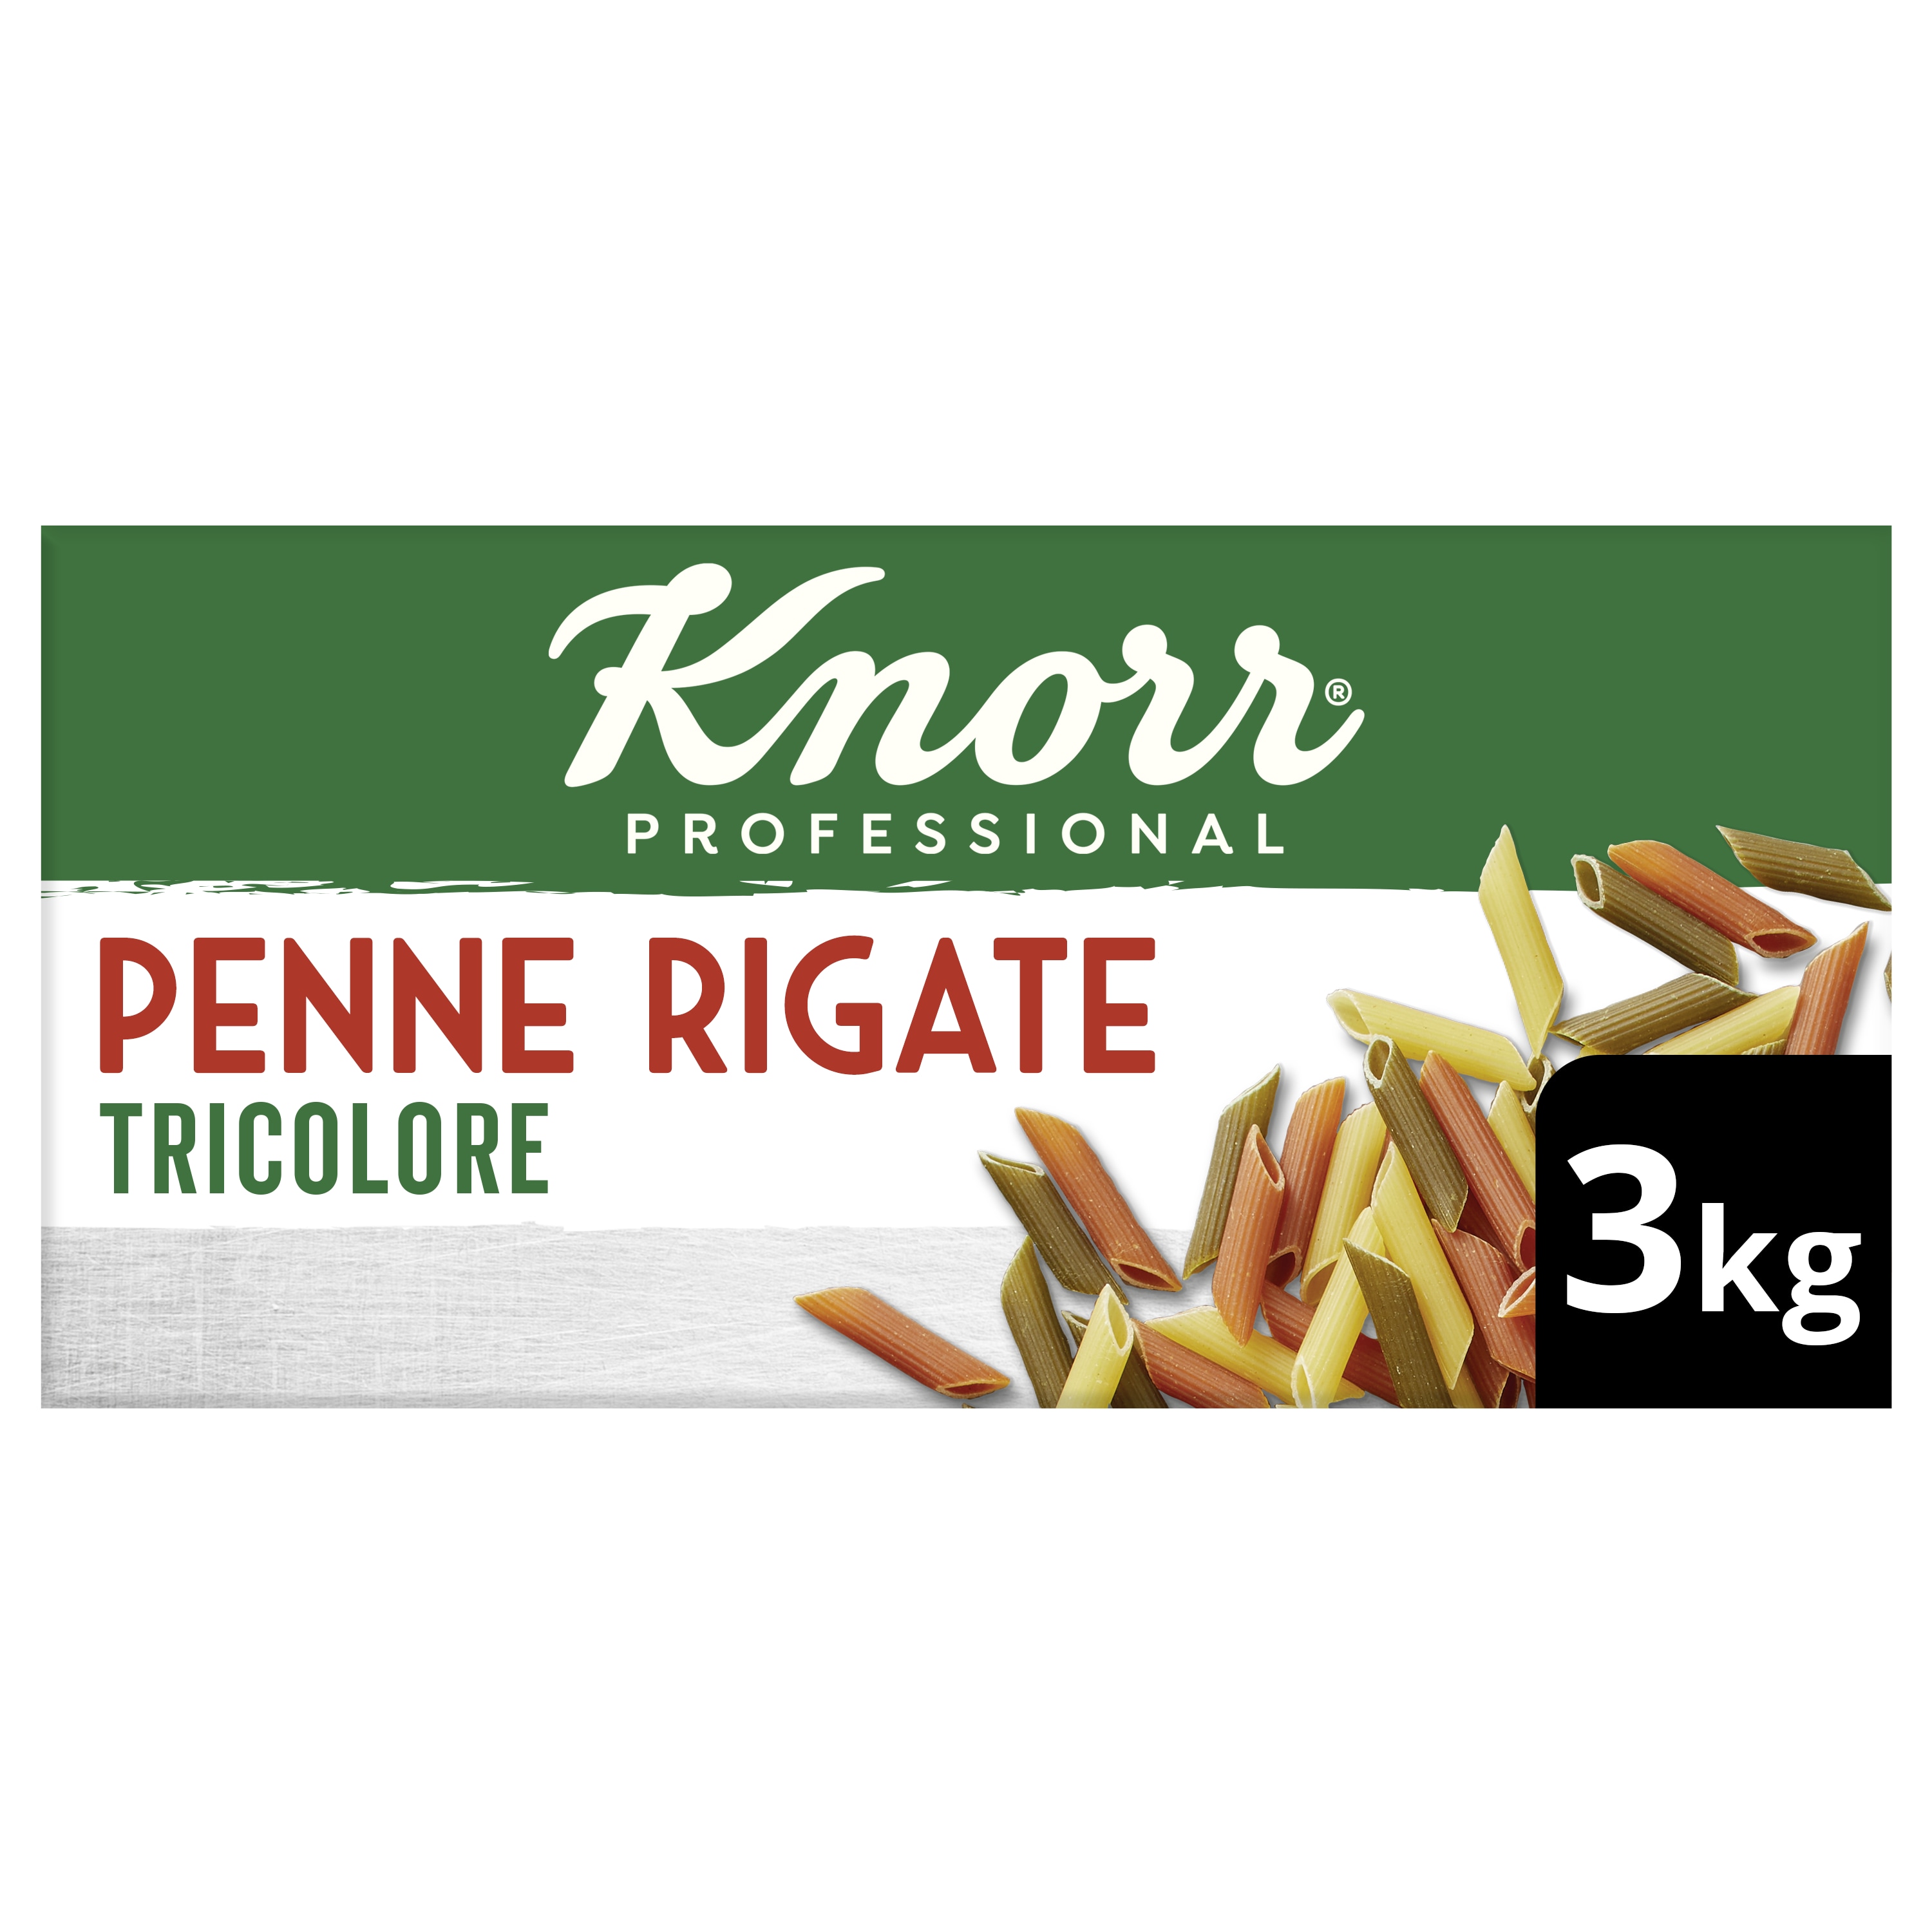 Knorr Professional Italiana Penne Tricolore 3kg - 